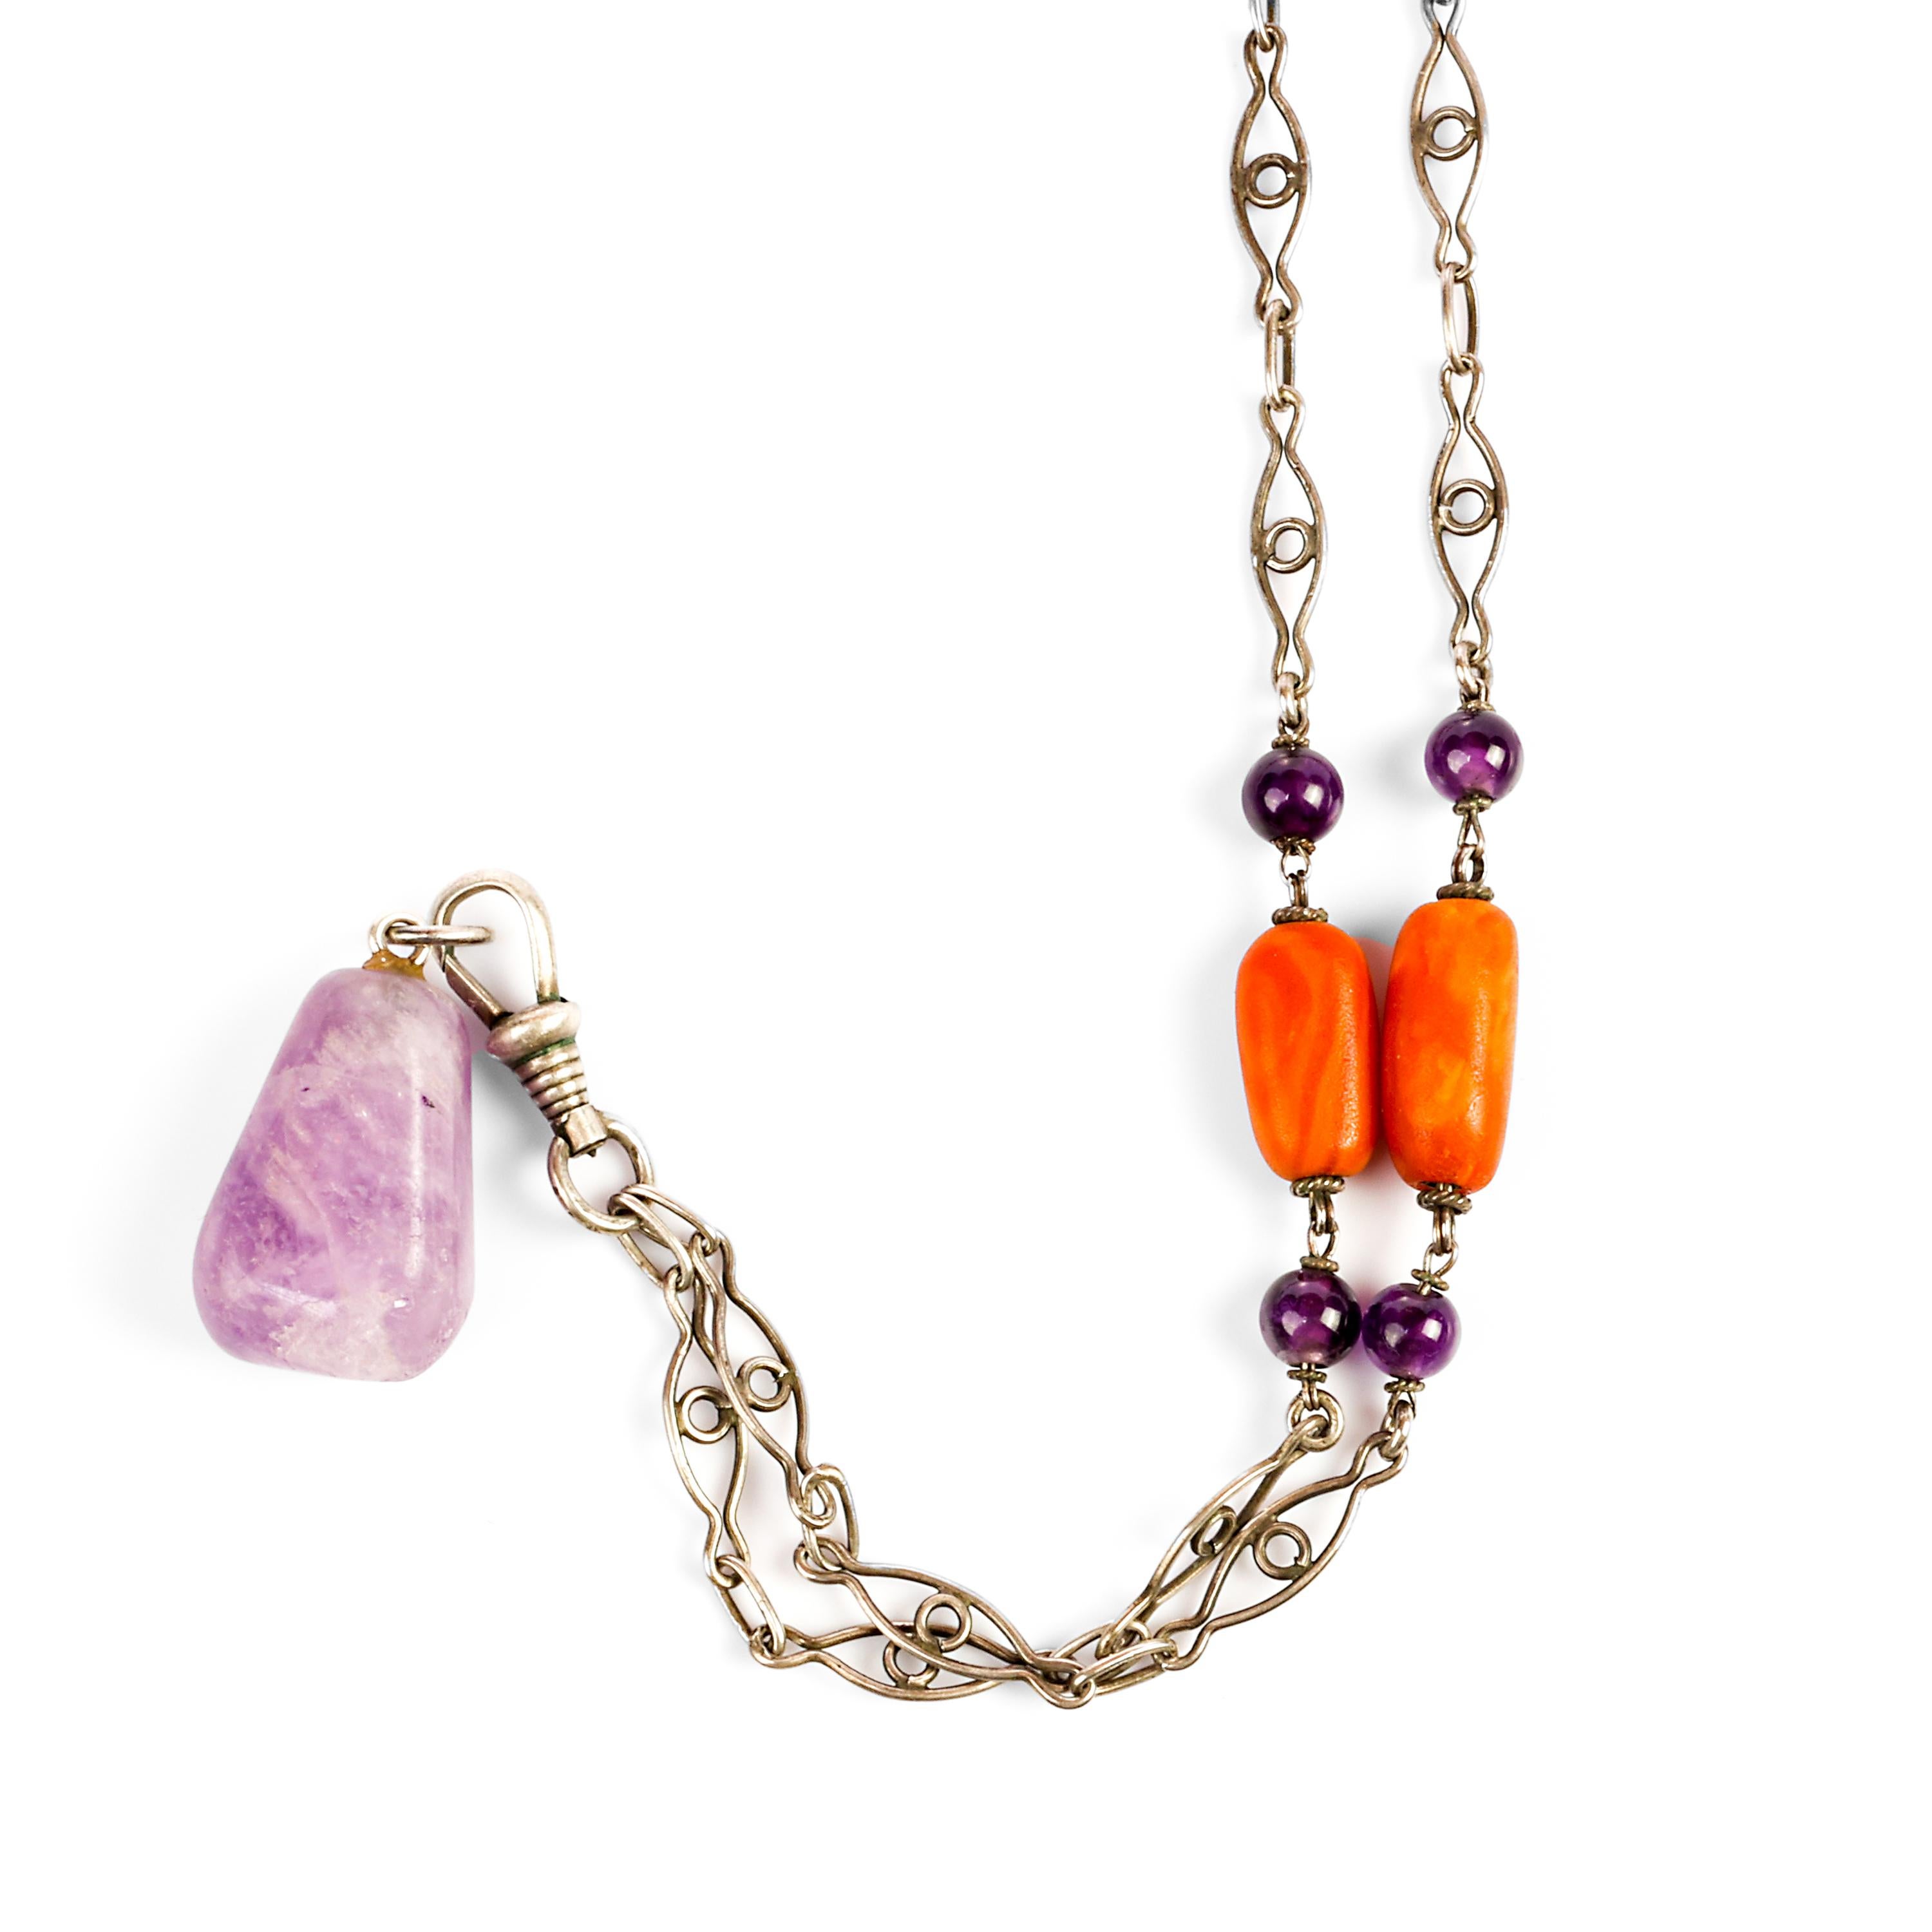 Bead Victorian Necklace Amethyst and Amber 59